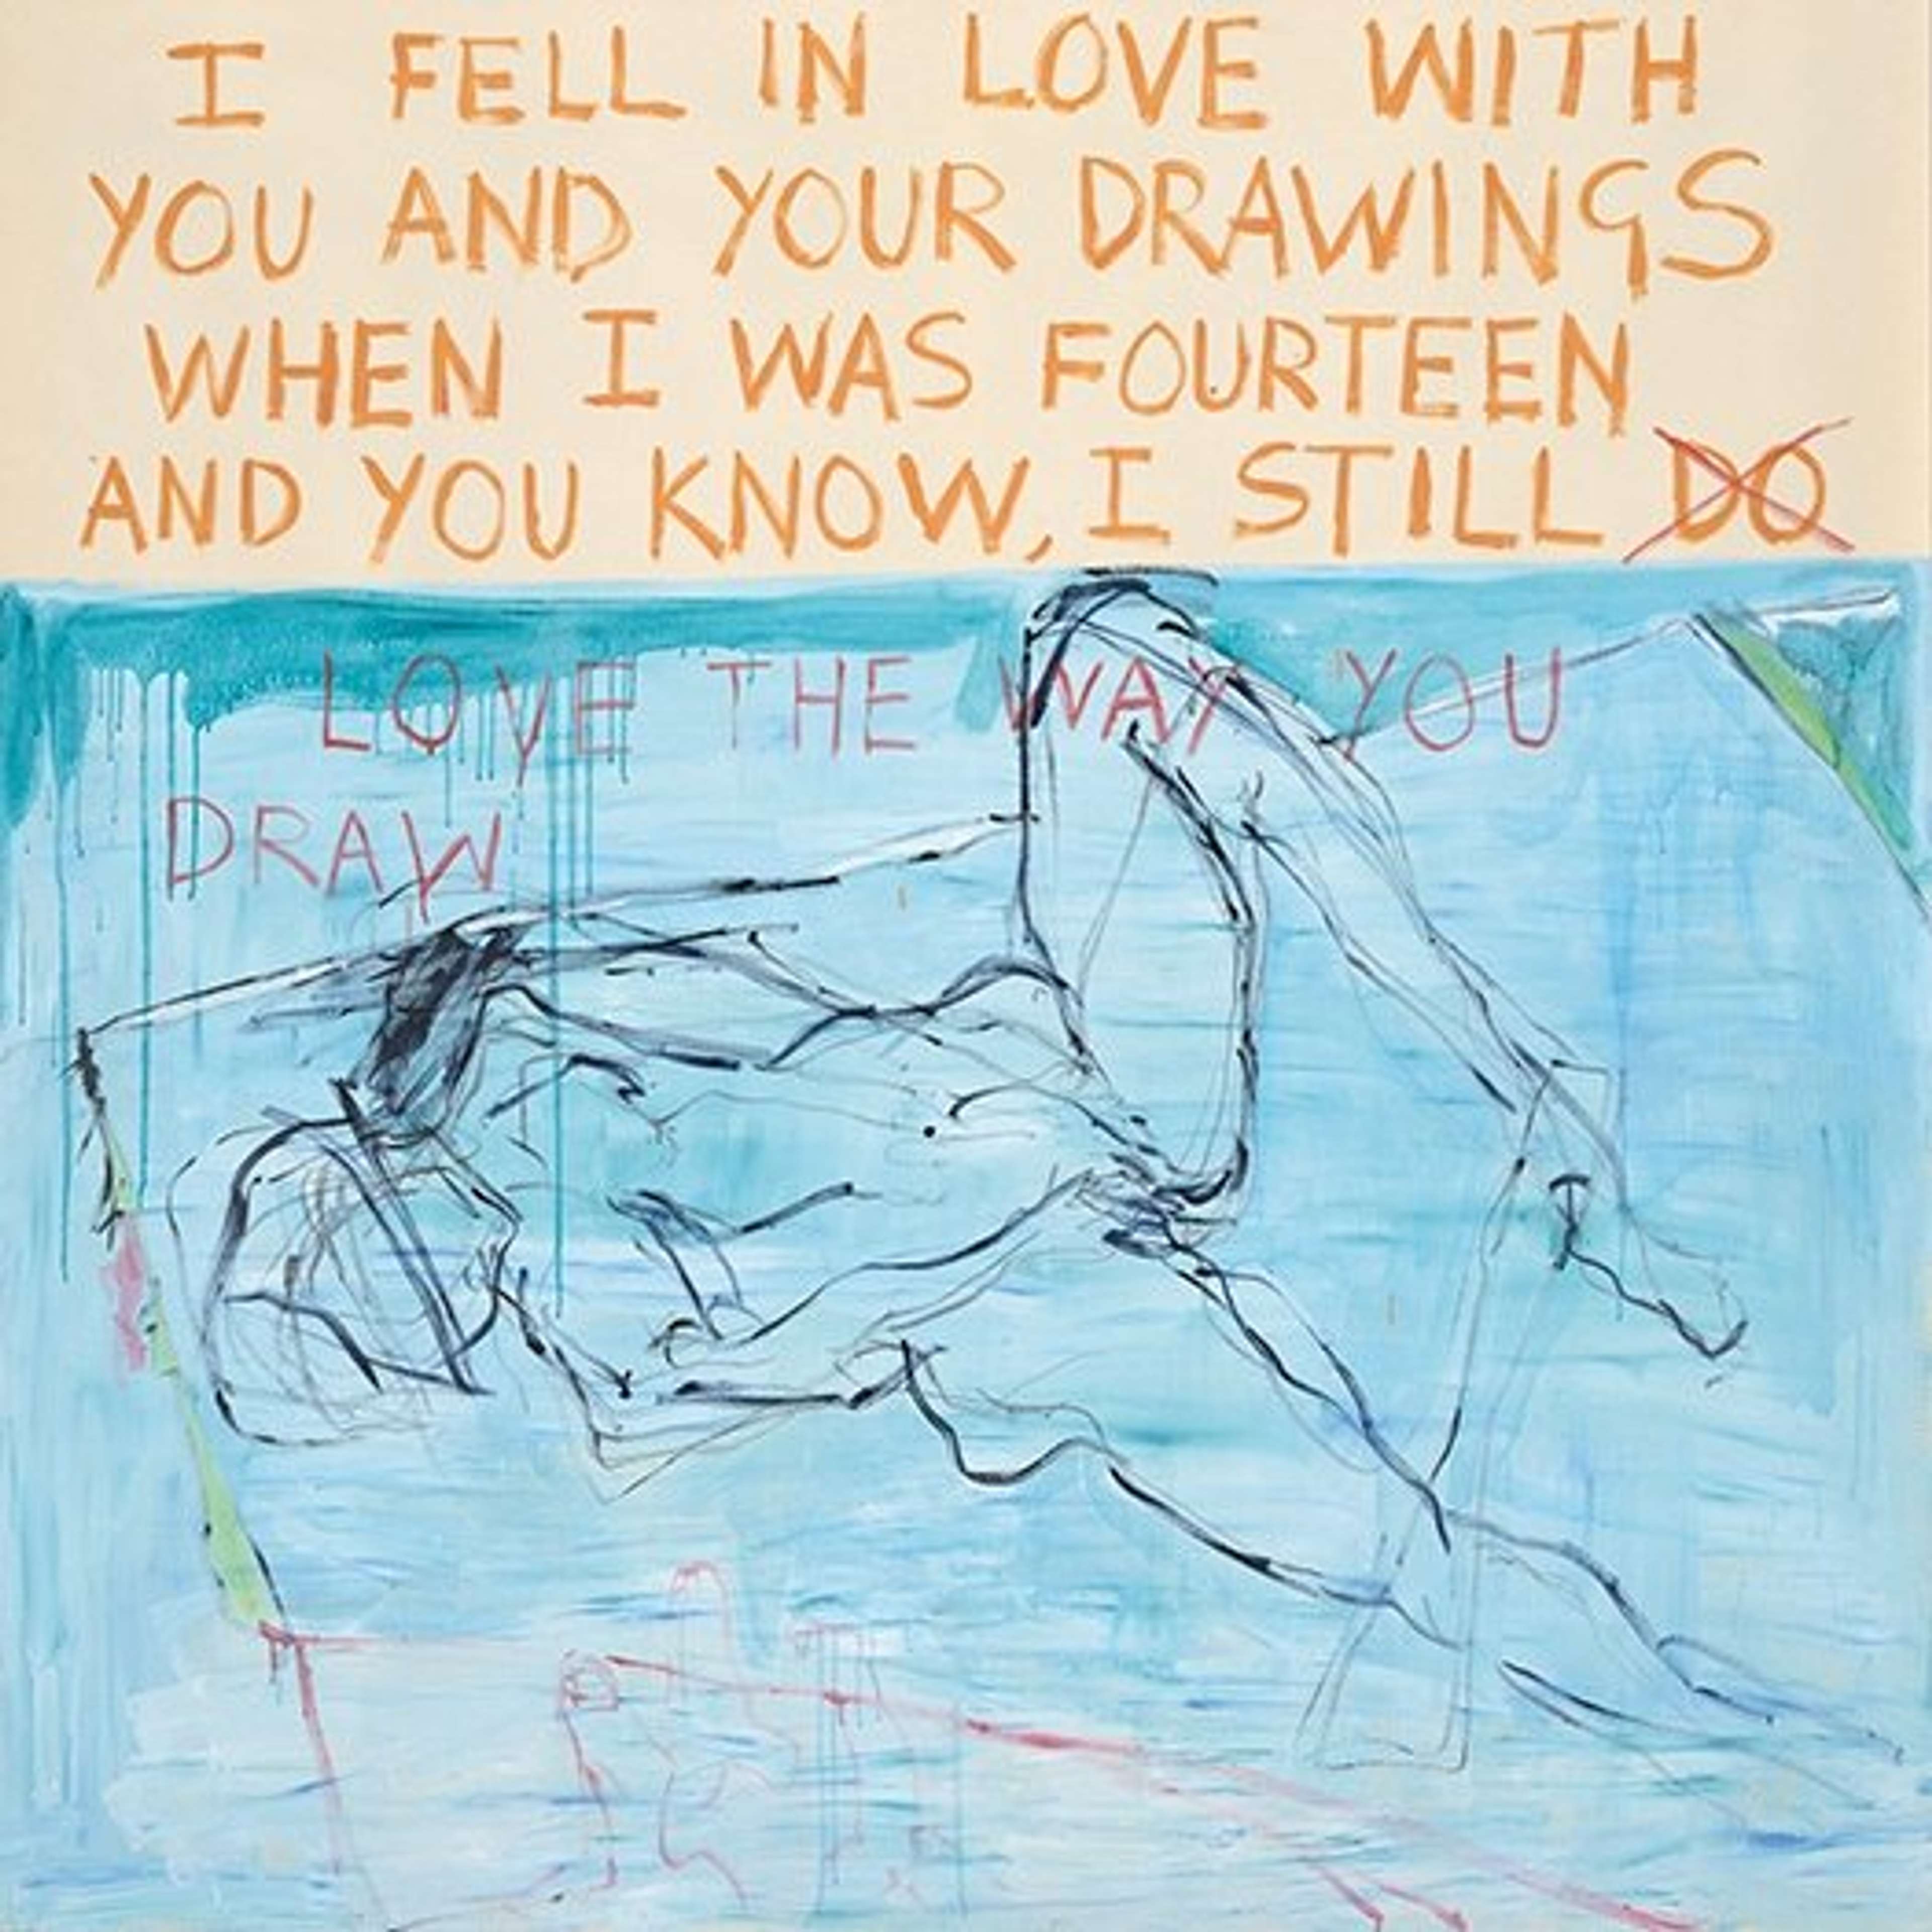 Exorcism Of The Last Painting I Ever Made by Tracey Emin